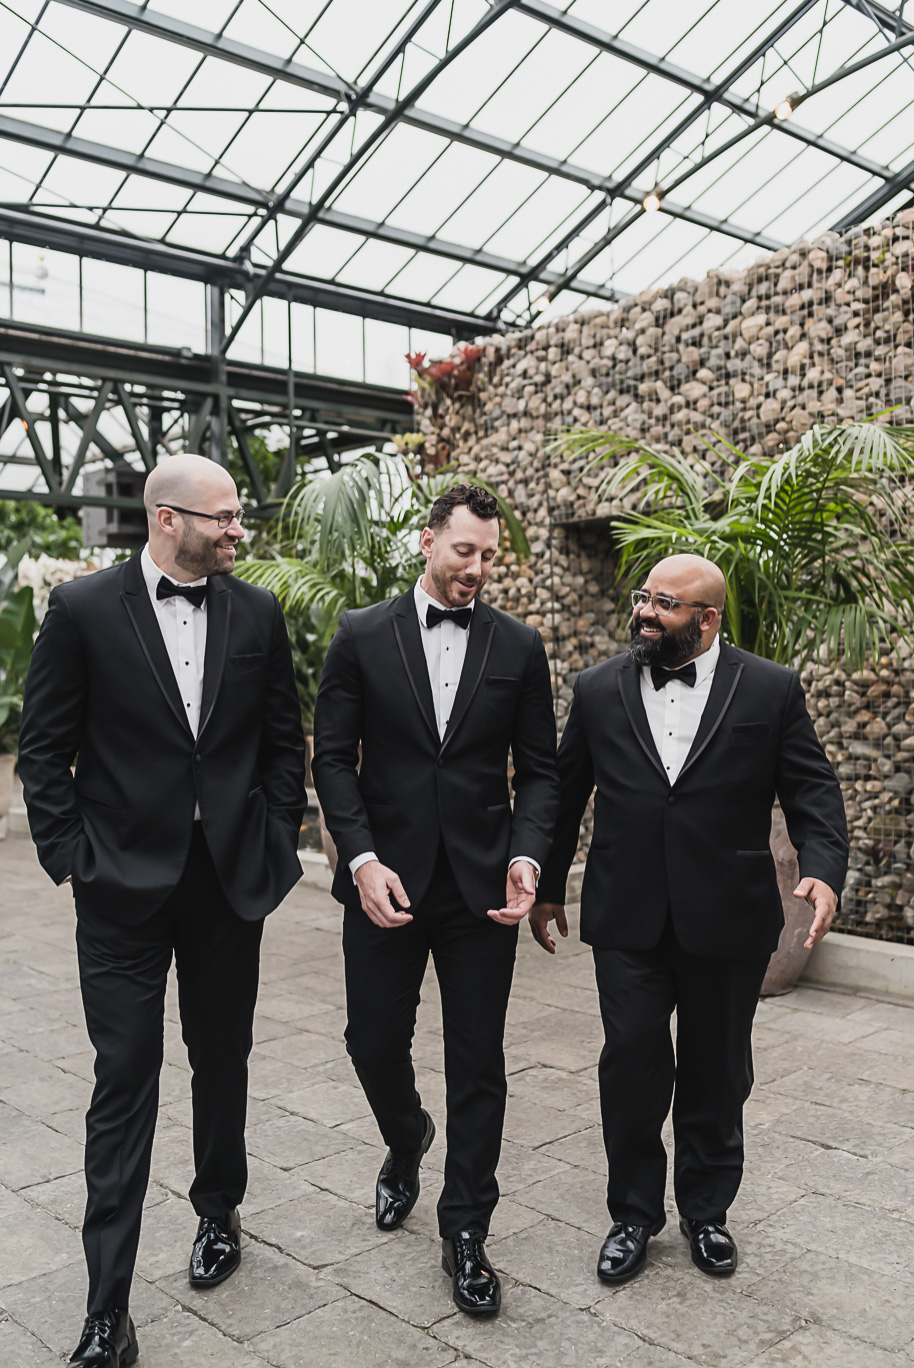 Winter black-tie Planterra Conservatory Wedding in West Bloomfield, Michigan provided by Kari Dawson, top-rated Detroit wedding photographer, and her team.